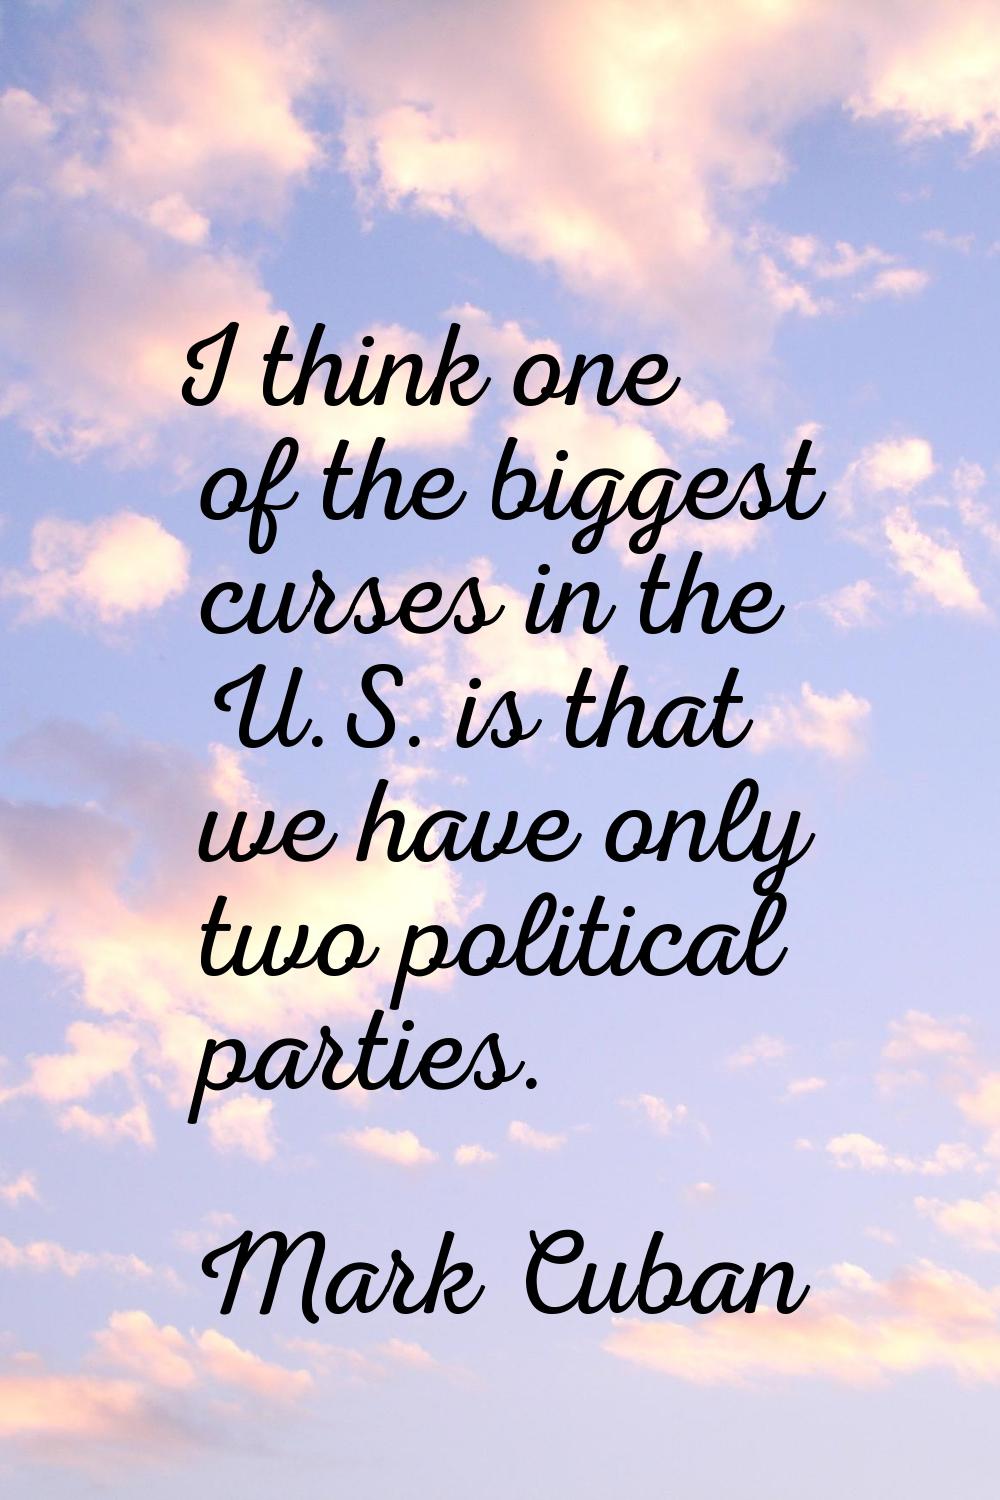 I think one of the biggest curses in the U.S. is that we have only two political parties.